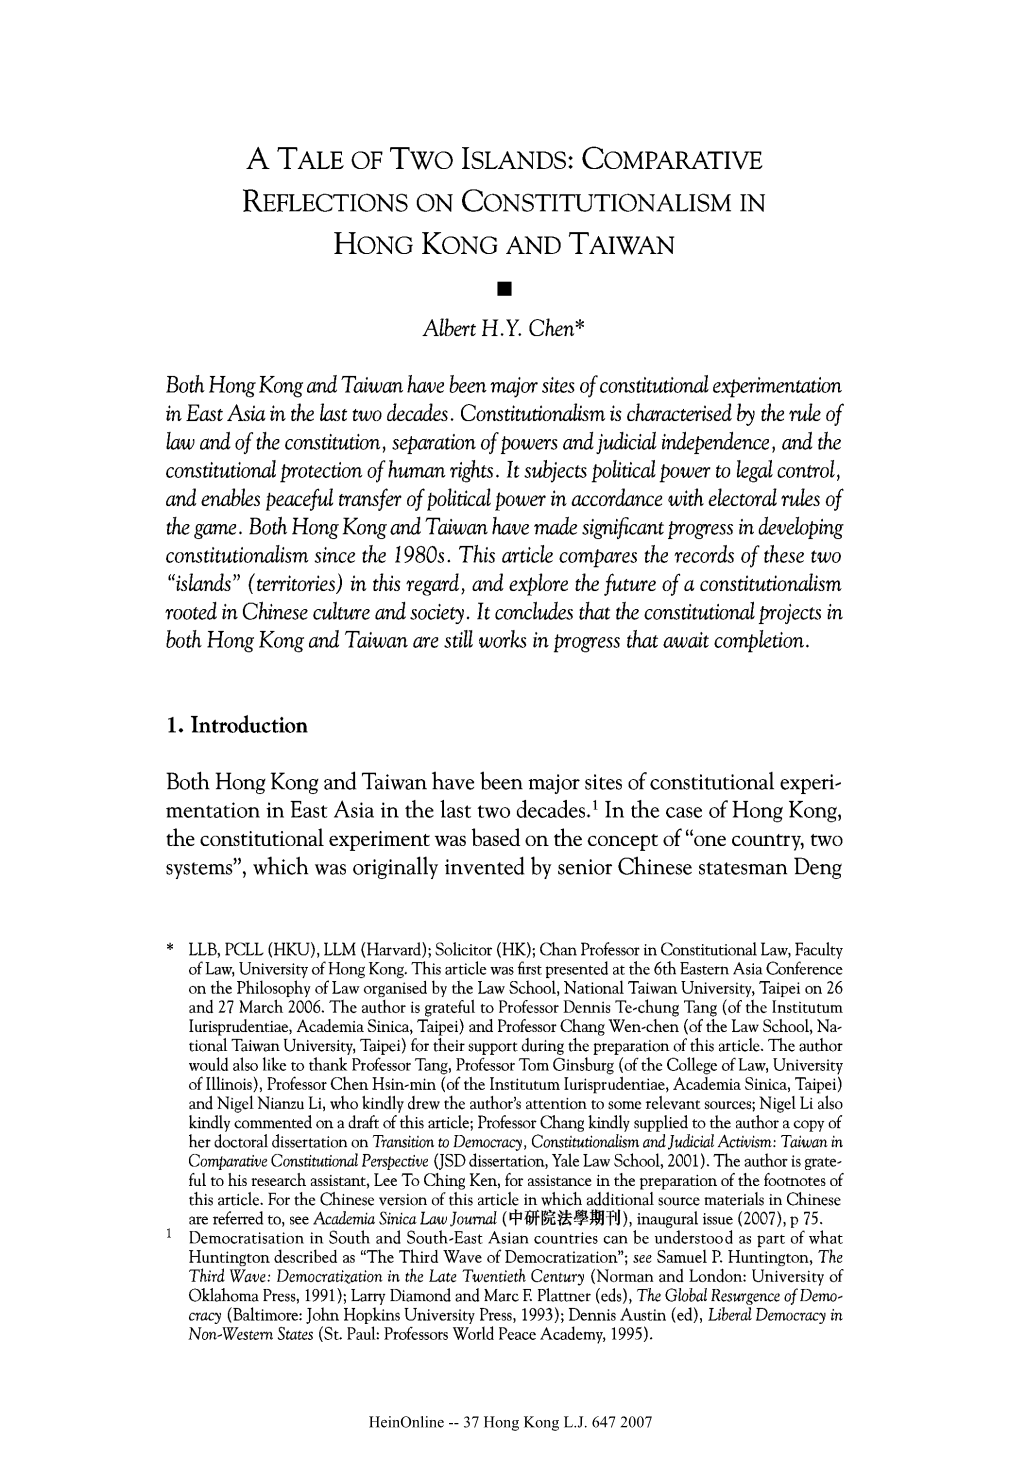 Comparative Reflections on Constitutionalism in Hong Kong and Taiwan